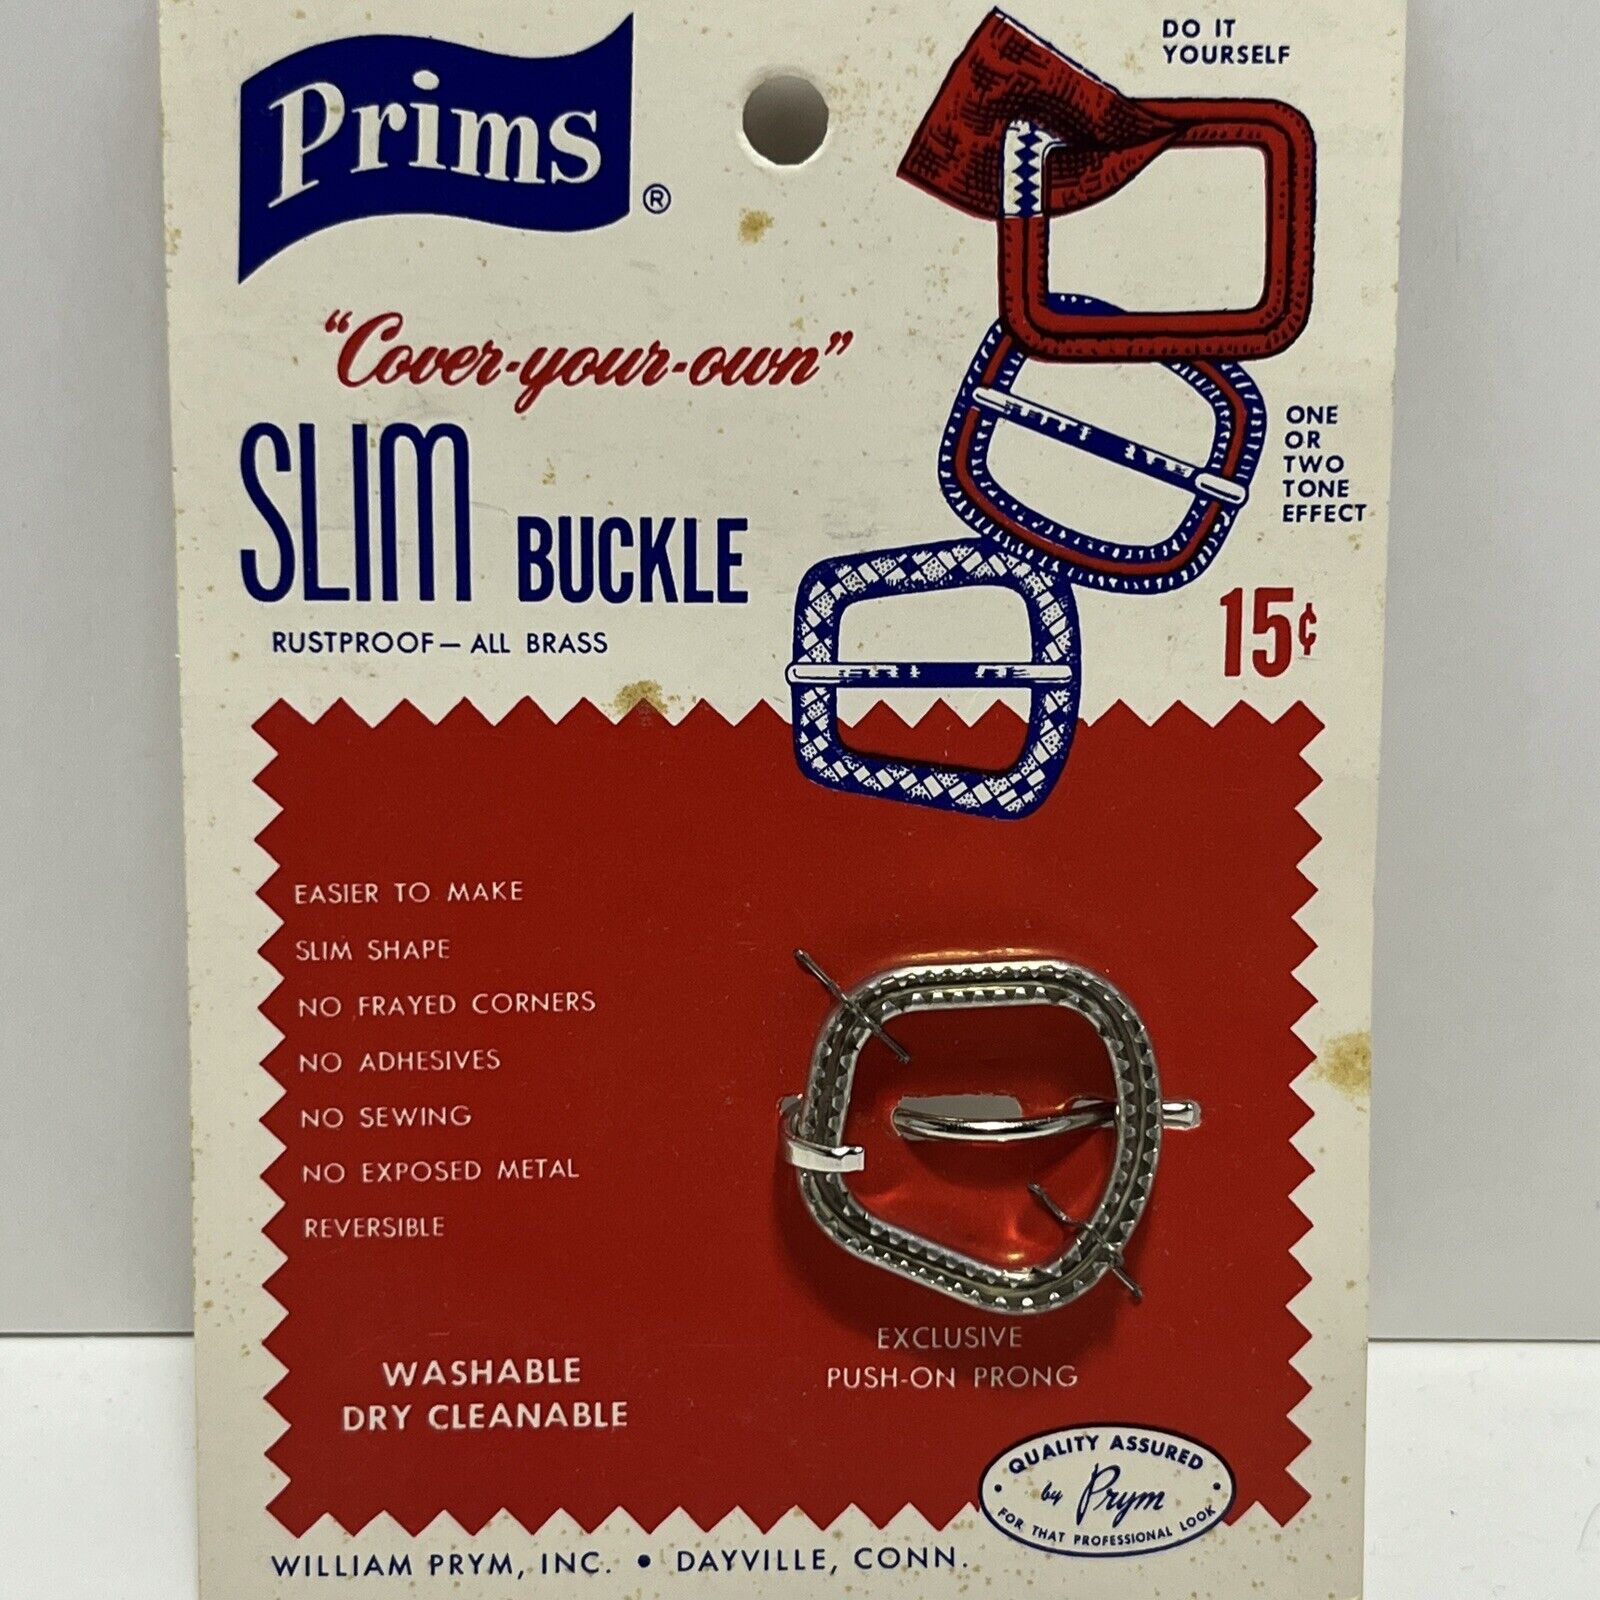 Vintage Prims Slim Buckle Cover Your Own Kit Rustproof All Brass New Old Stock